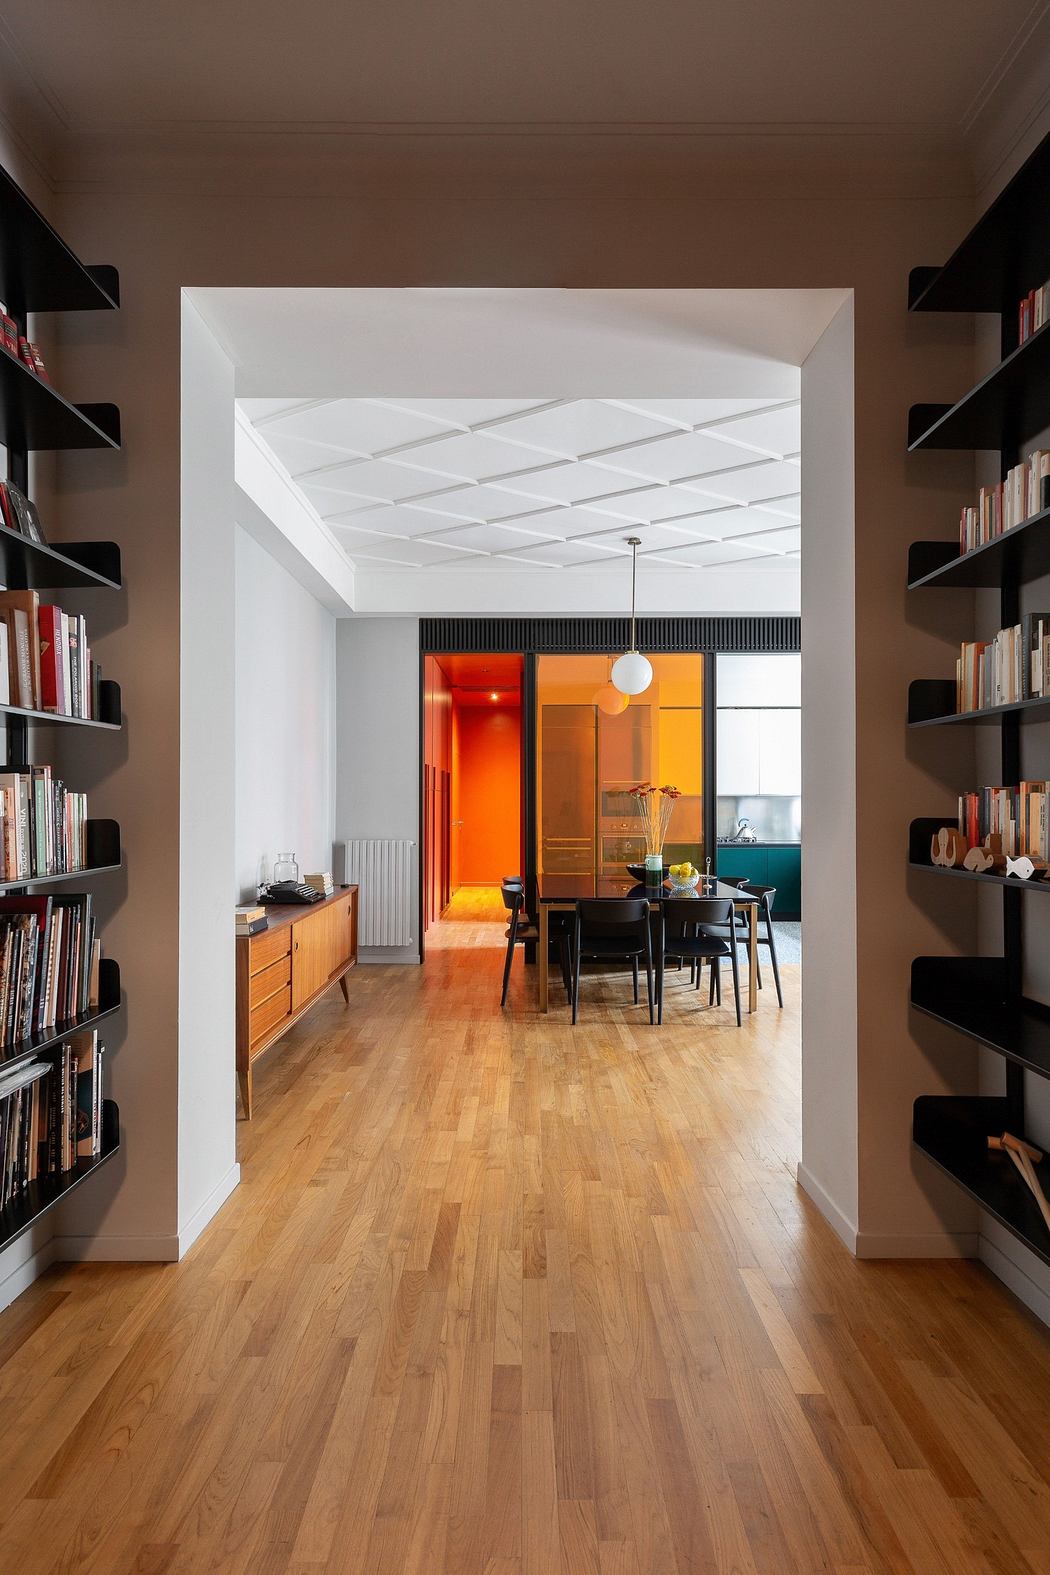 Modern hallway with bookshelves leading to a colorful dining area.